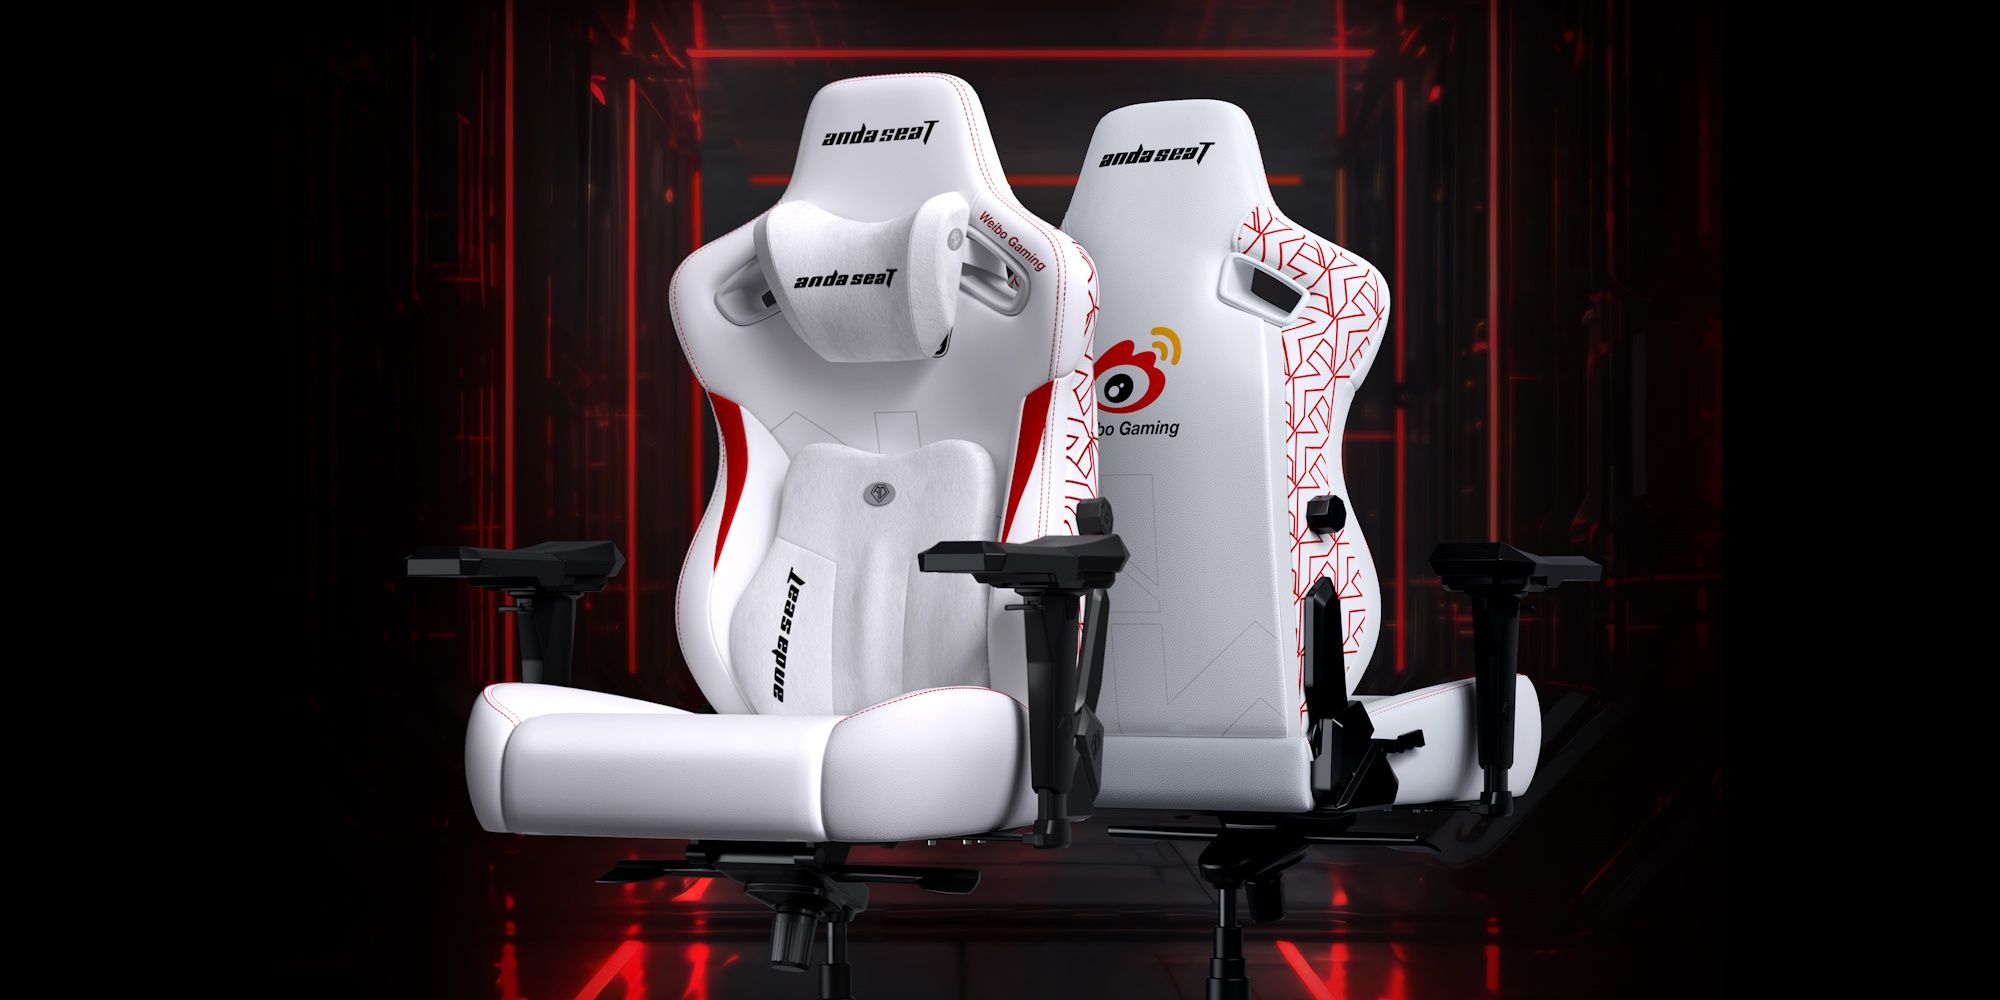 andaseat wbg edition chair in white on red and black background